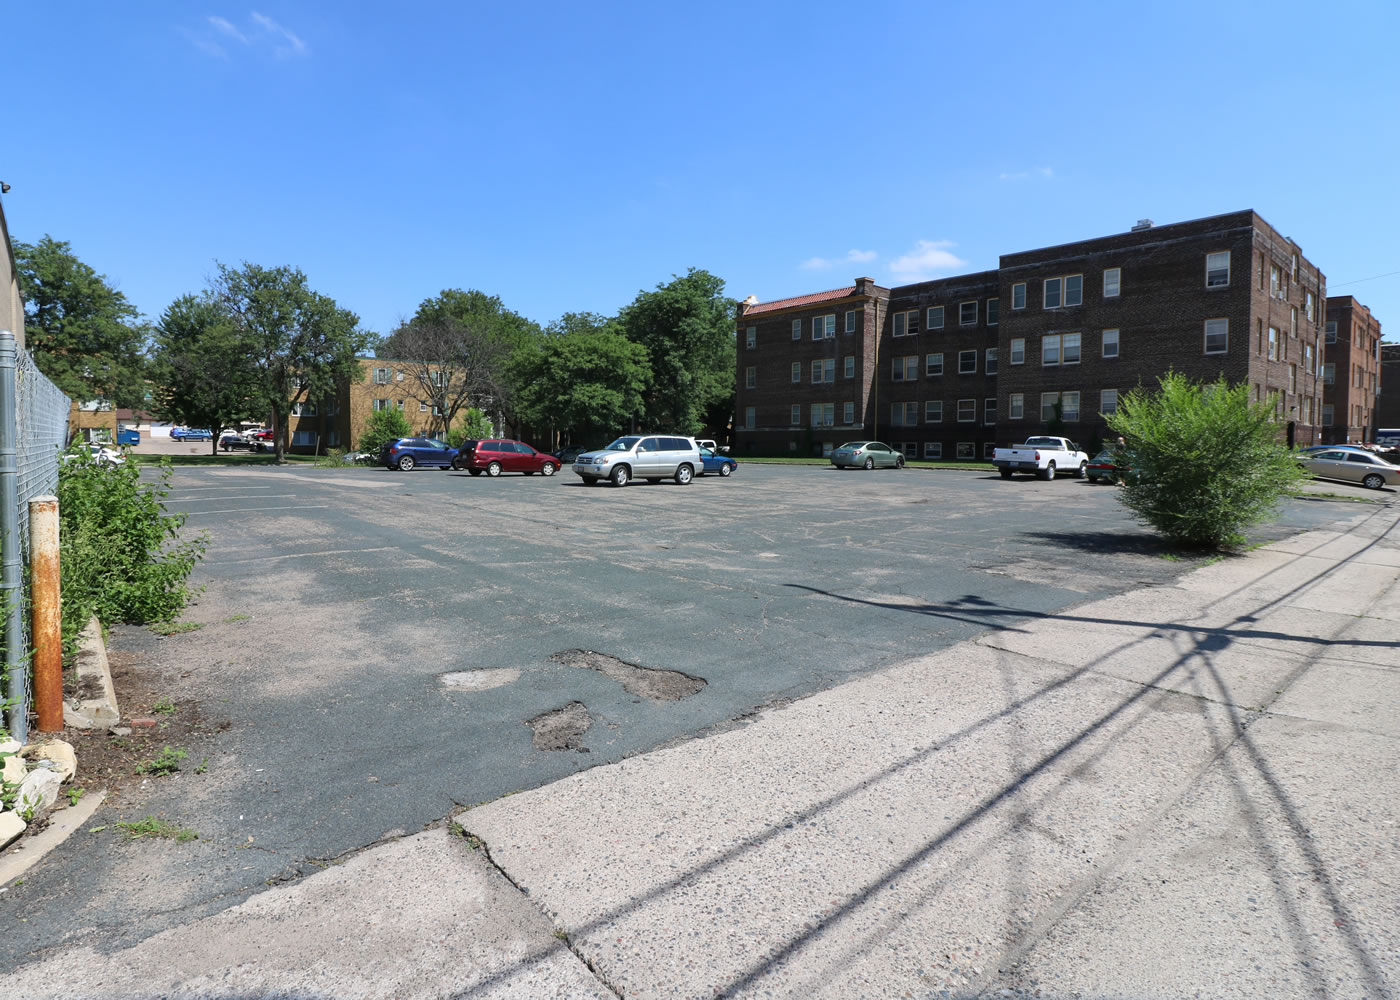 A "before" photo of the parking lot taken June 24, 2016.